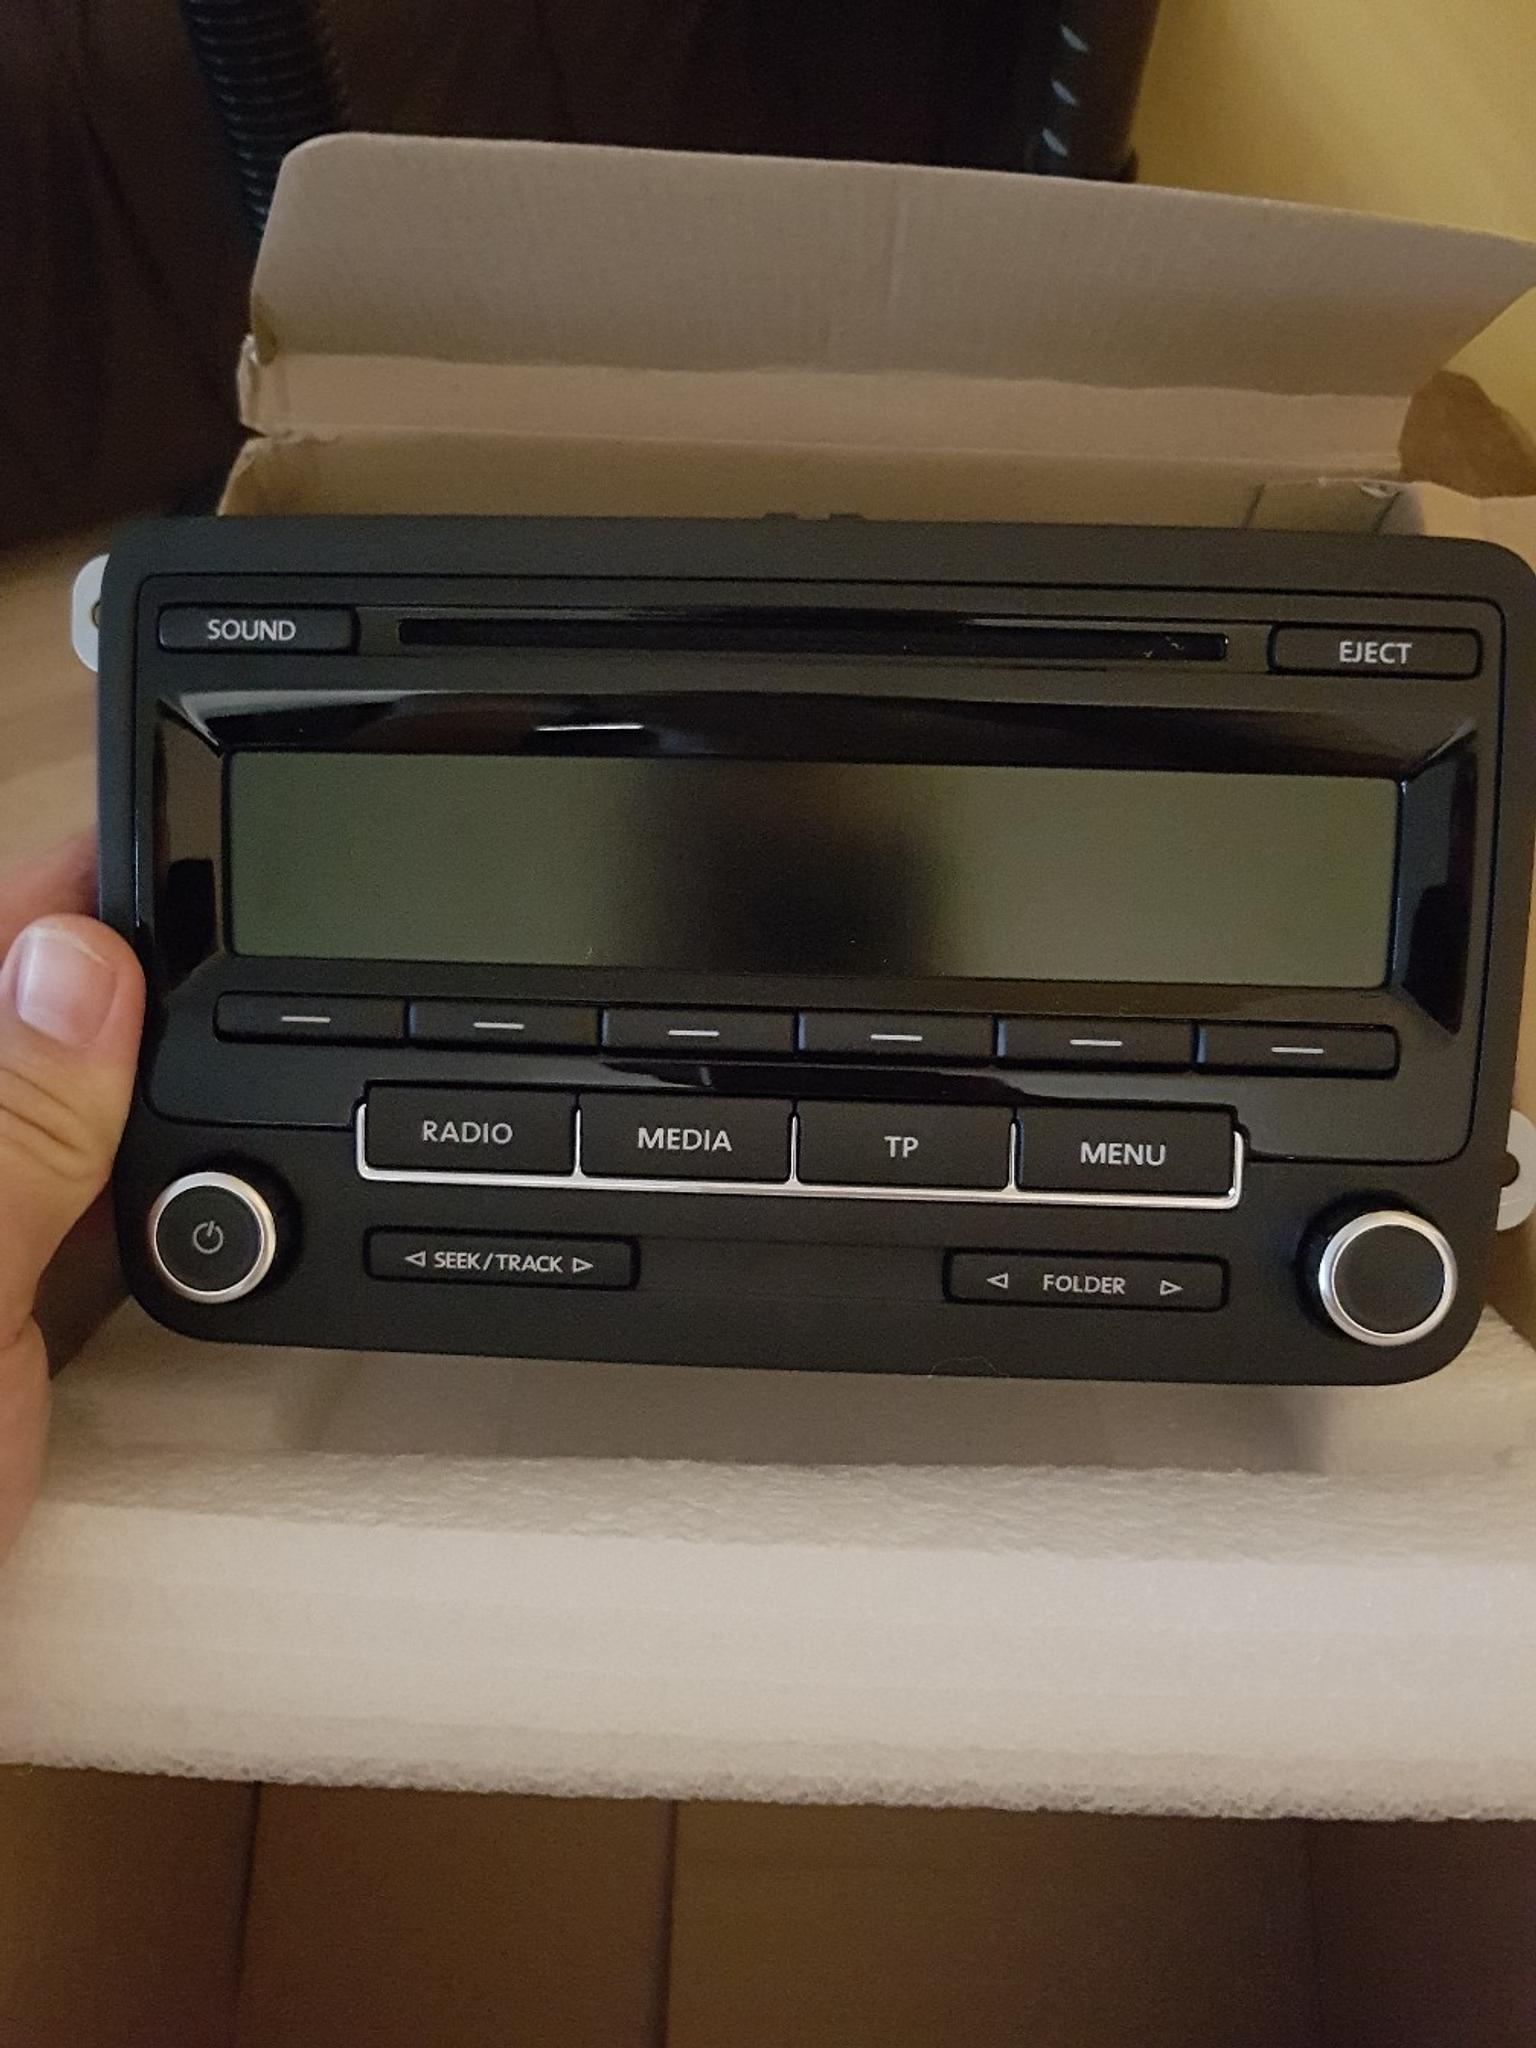 VW Radio RCD 310 EU in 4820 Bad Ischl for €59.00 for sale